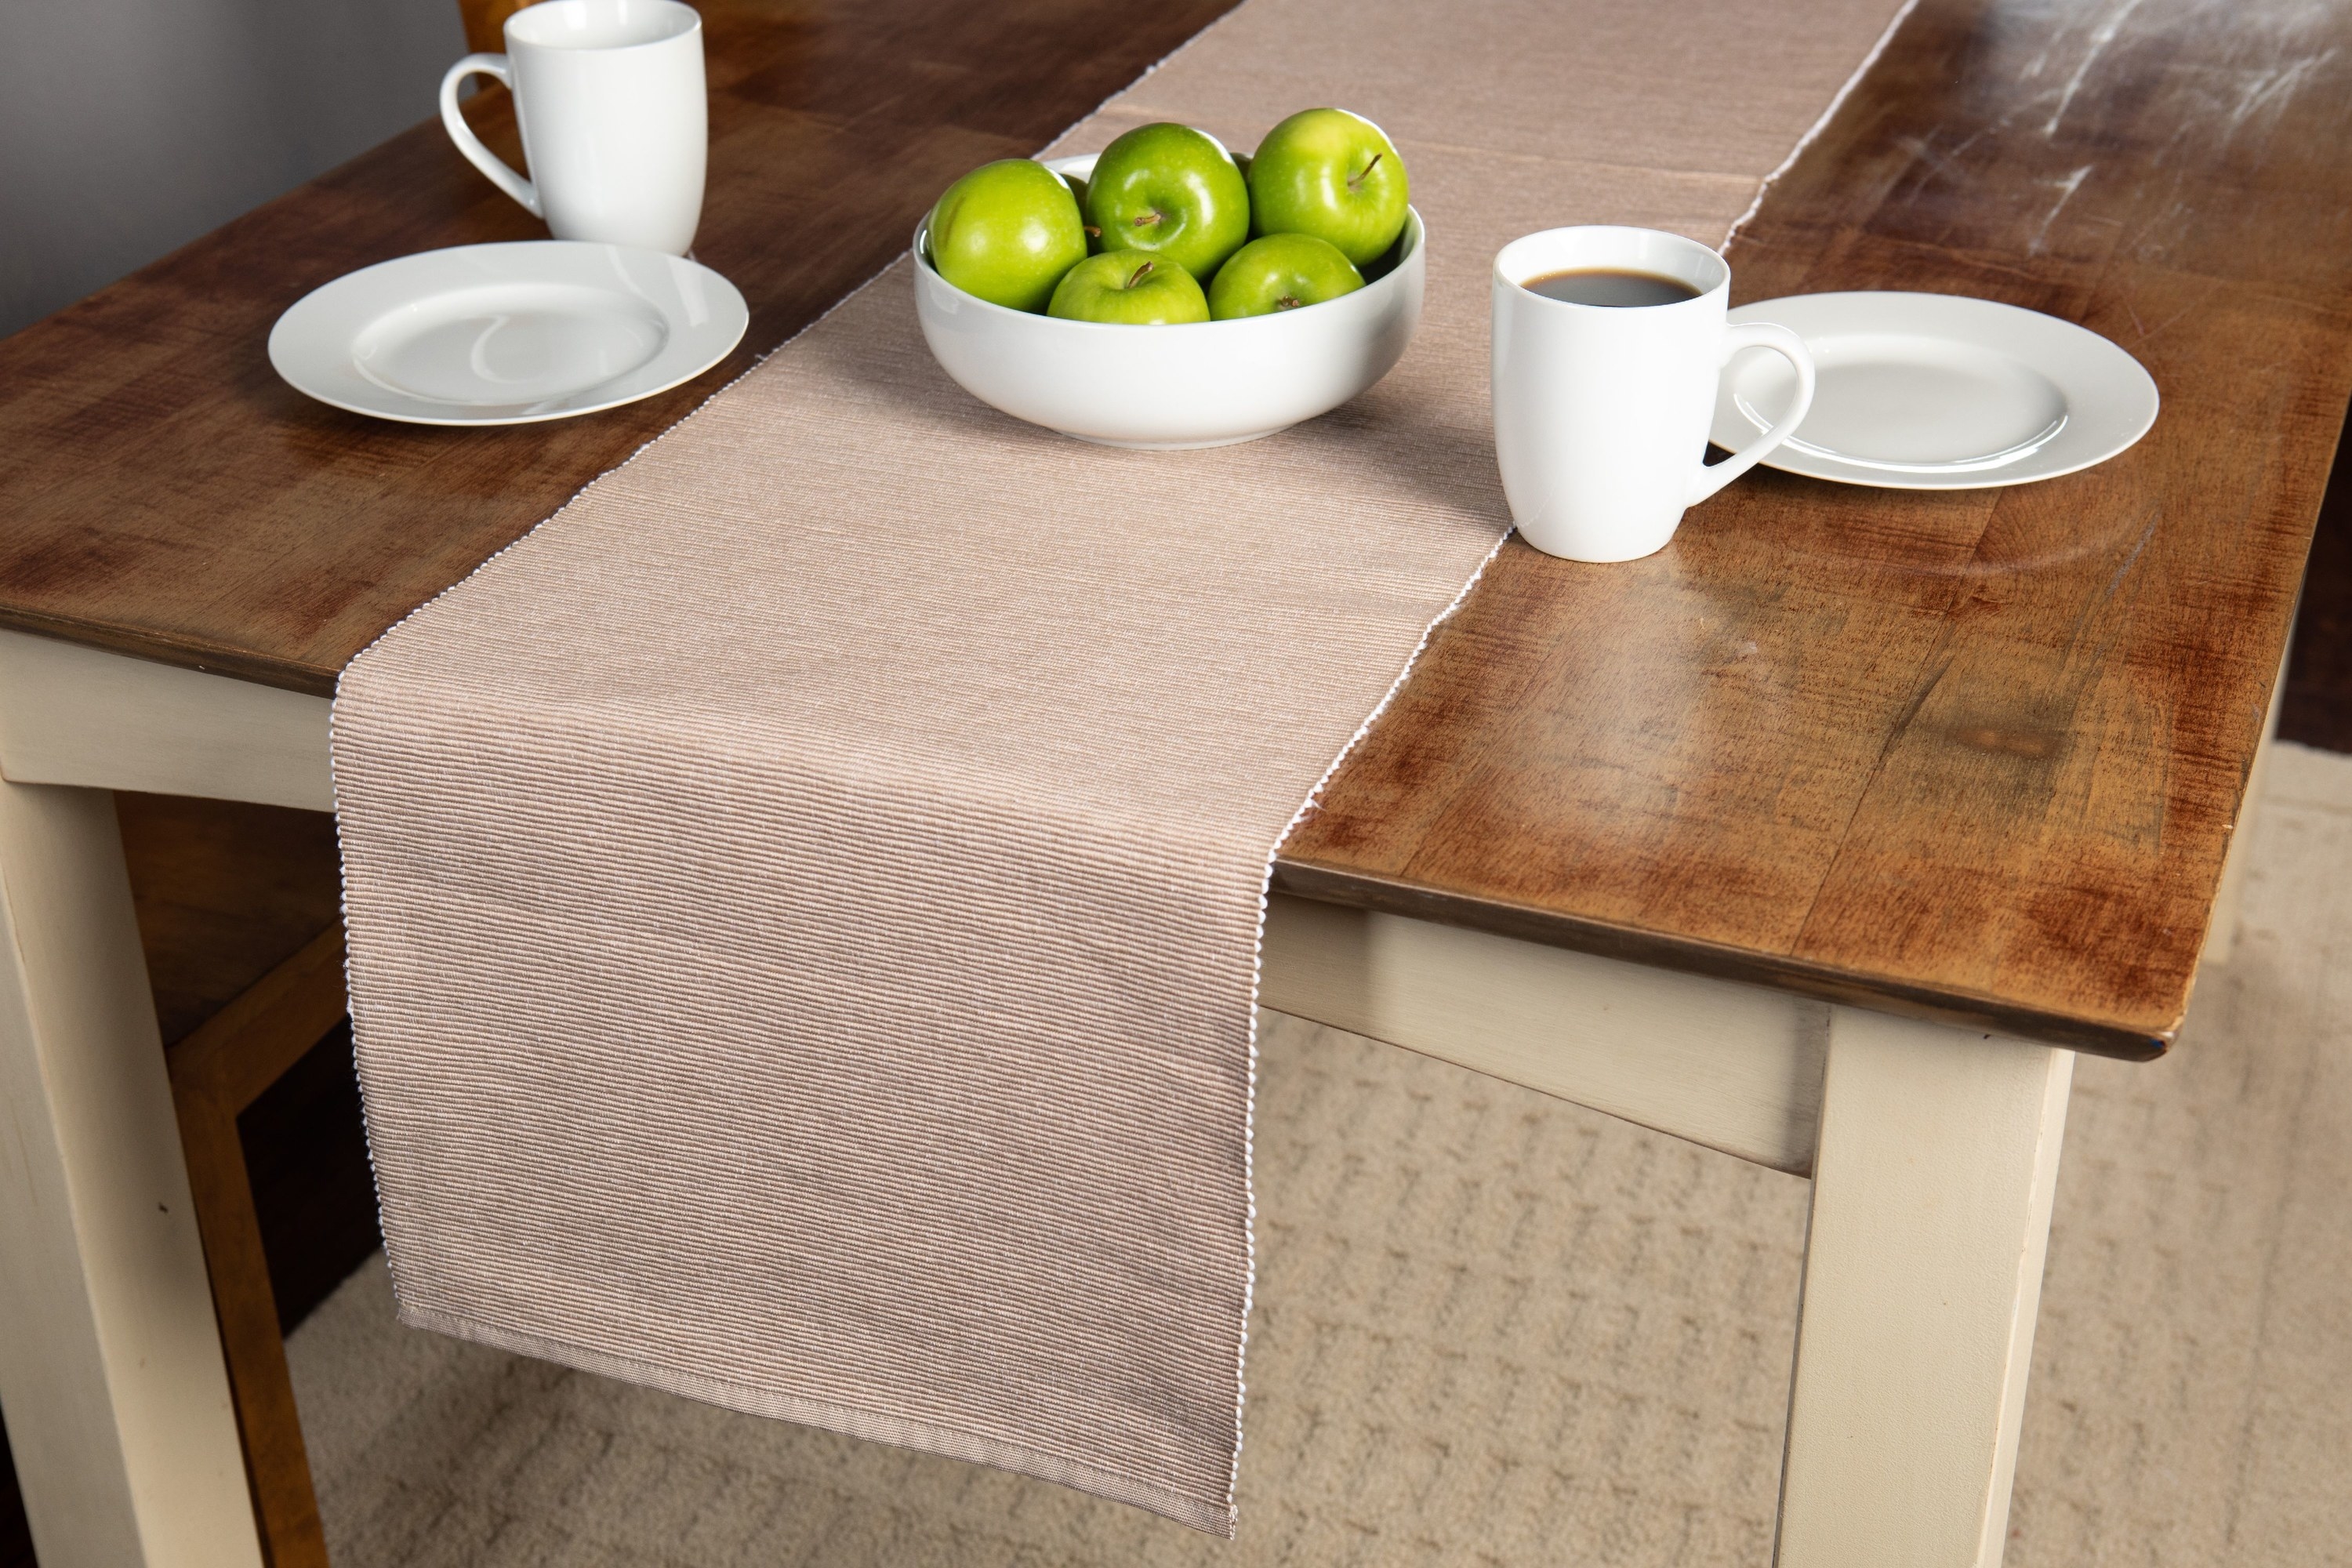 A tan table runner on a wood table